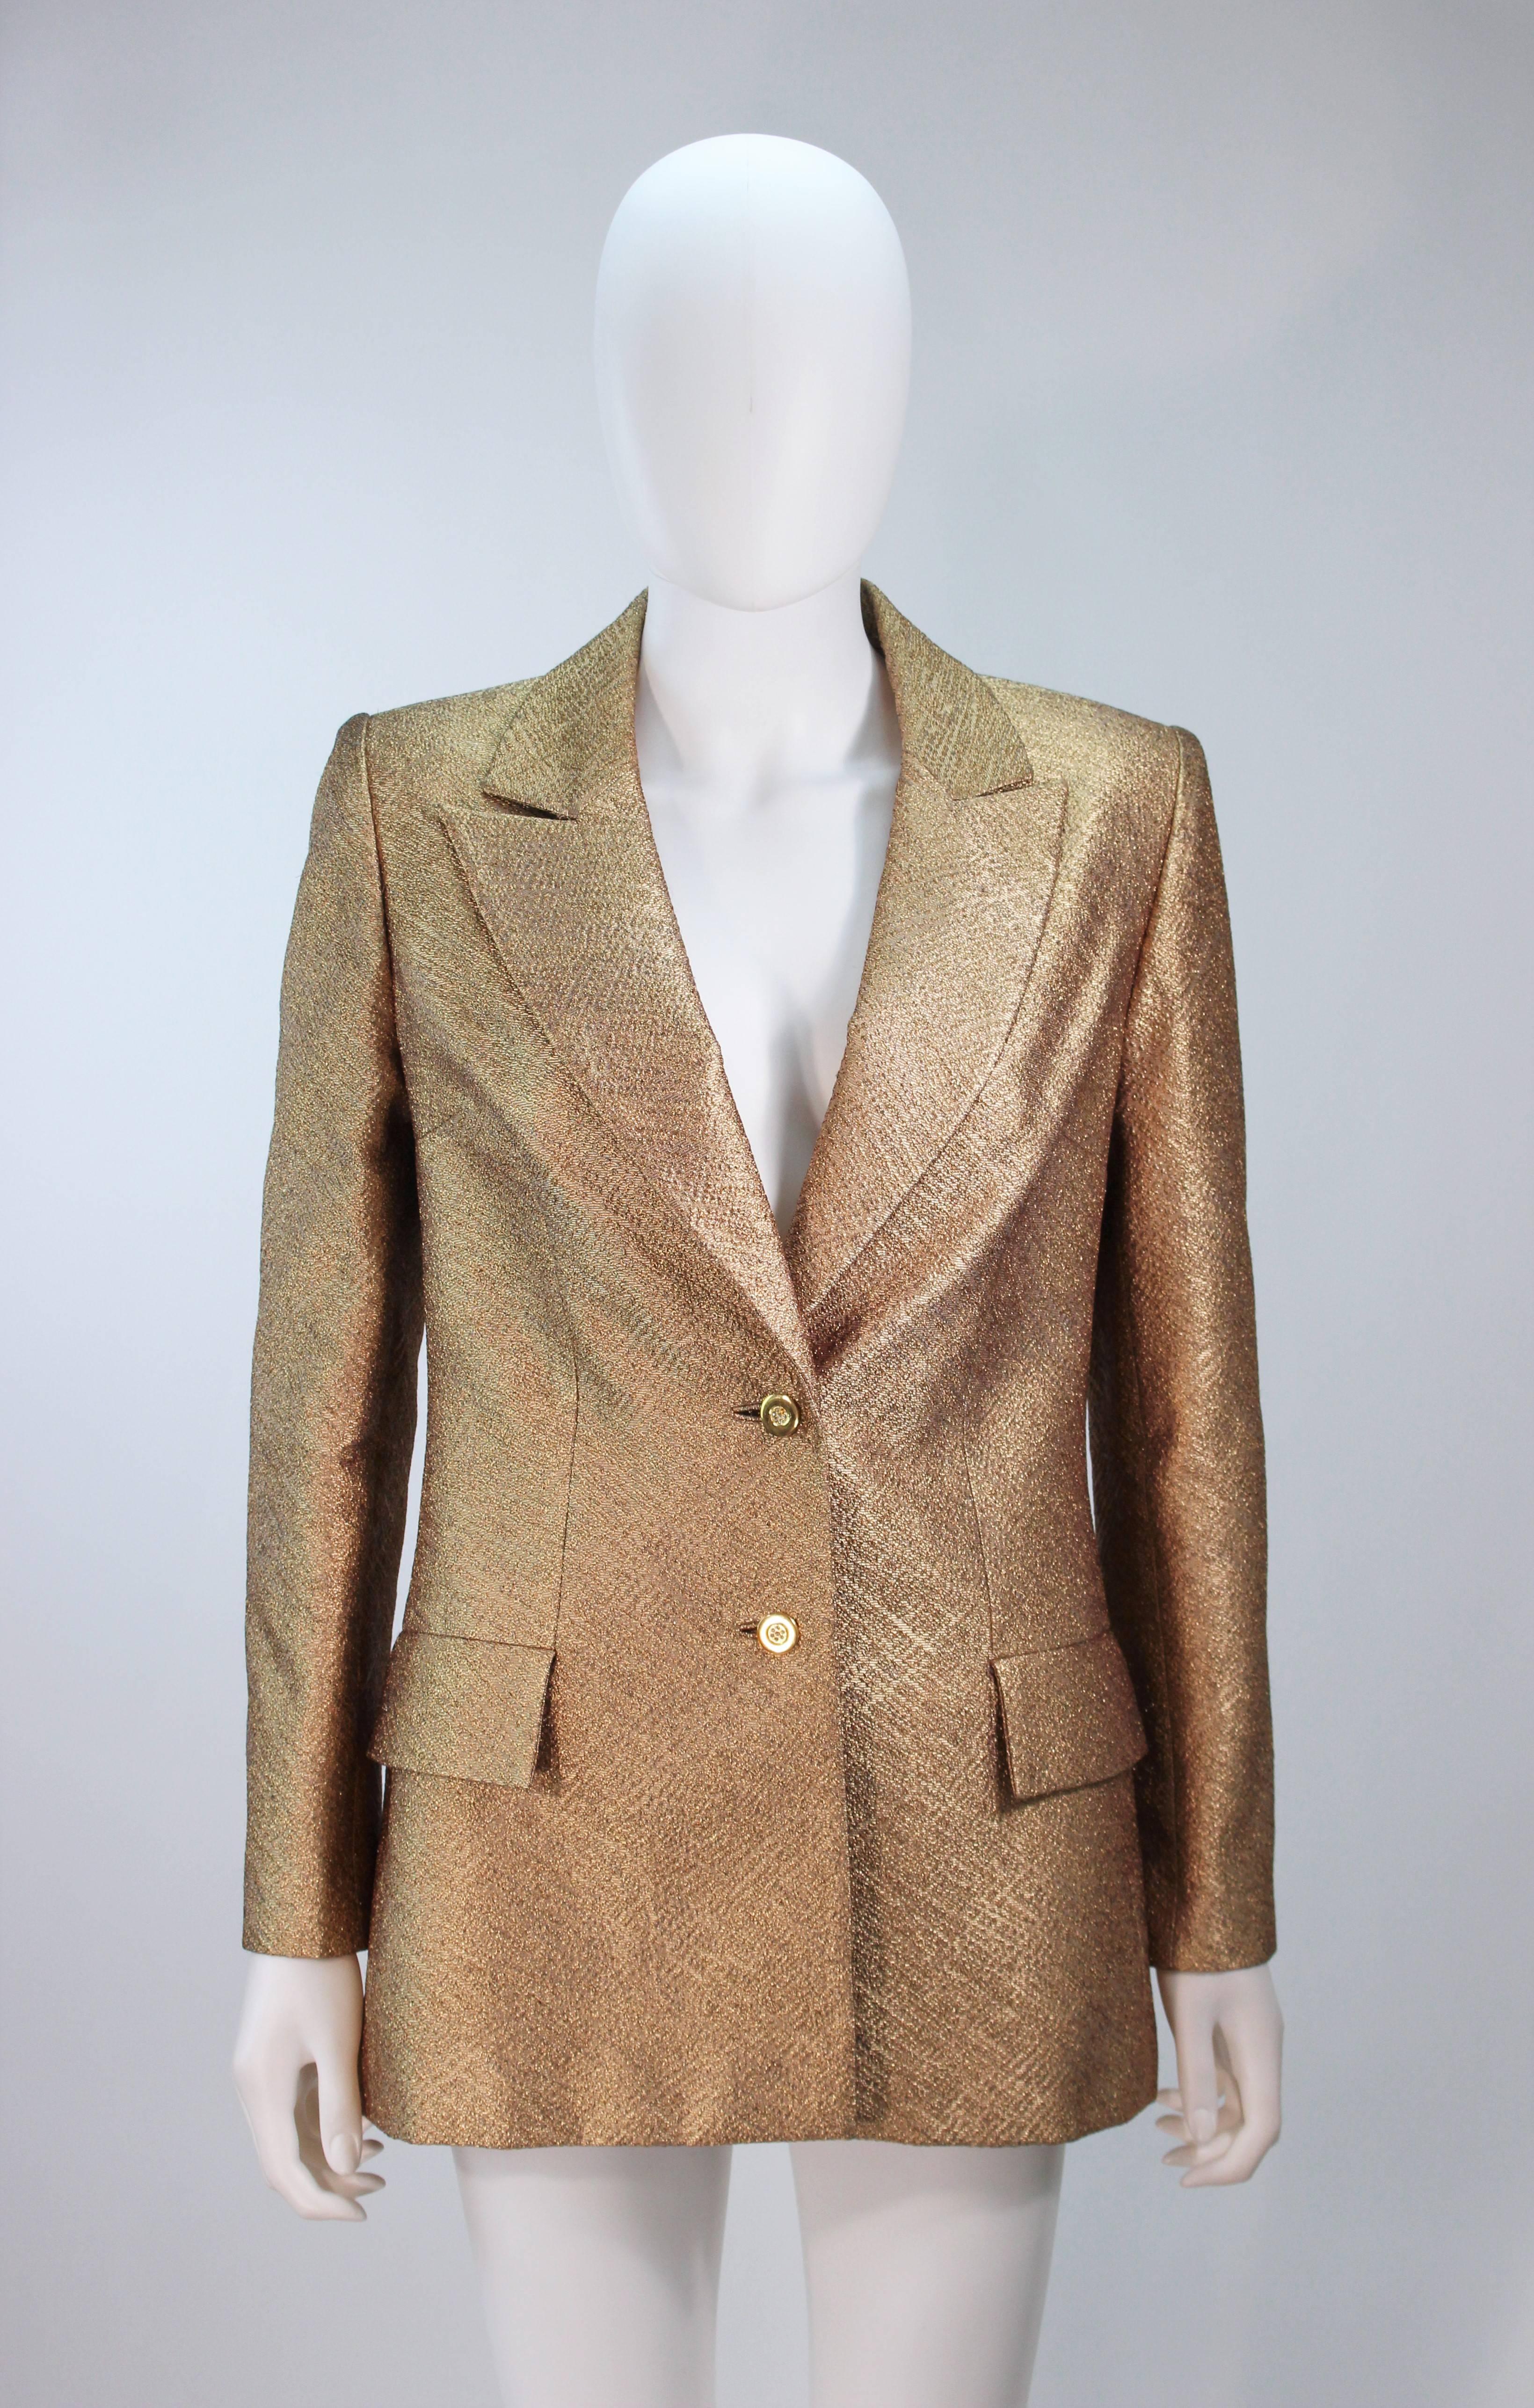 TRAVILLA Gold Metallic Silk Lame Pant Suit Ensemble Size 6 In Excellent Condition For Sale In Los Angeles, CA